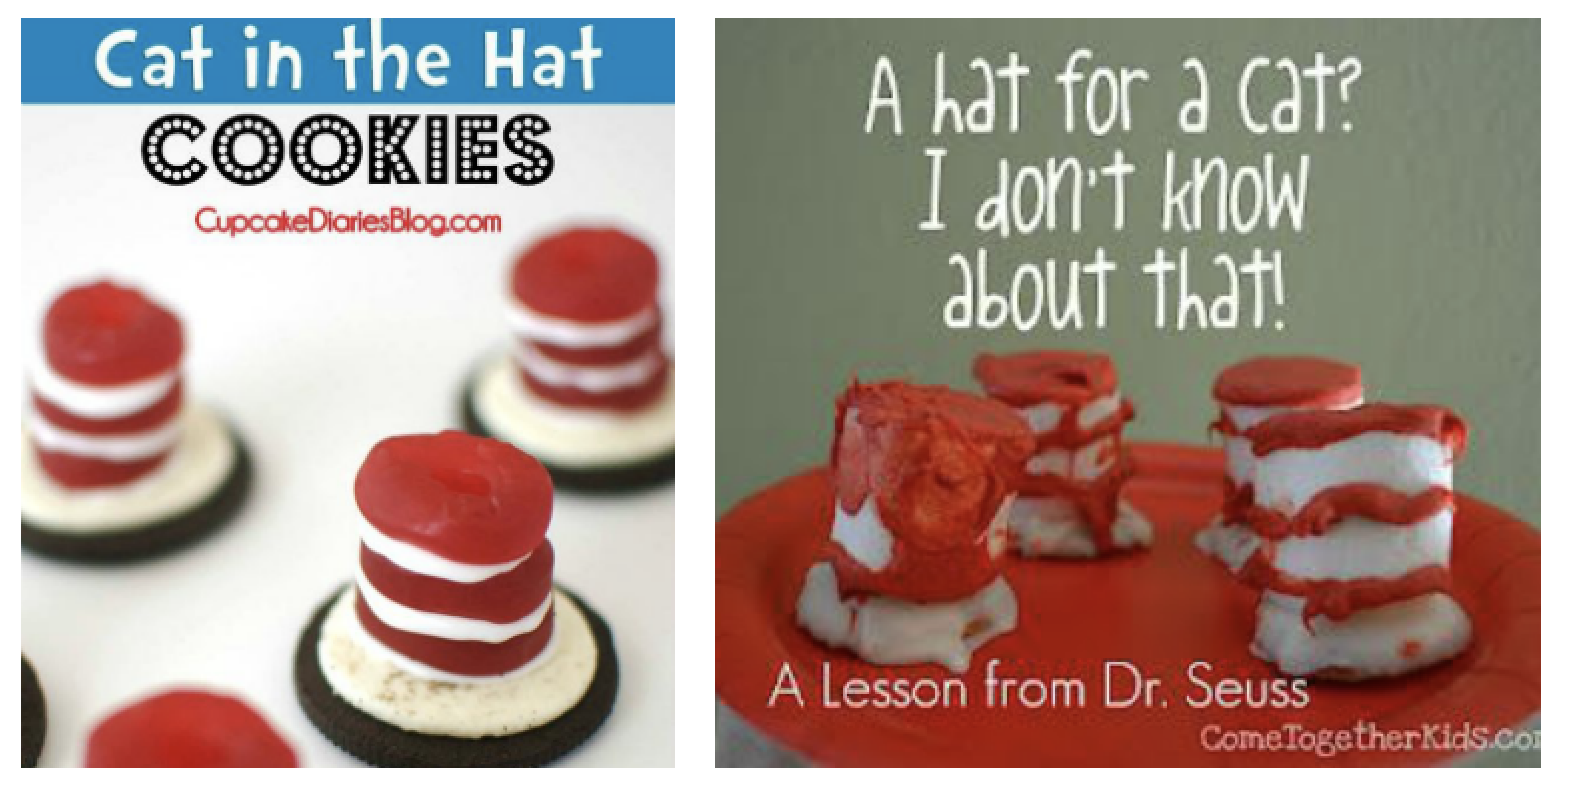 Cat In the Hat cookies homemade fail